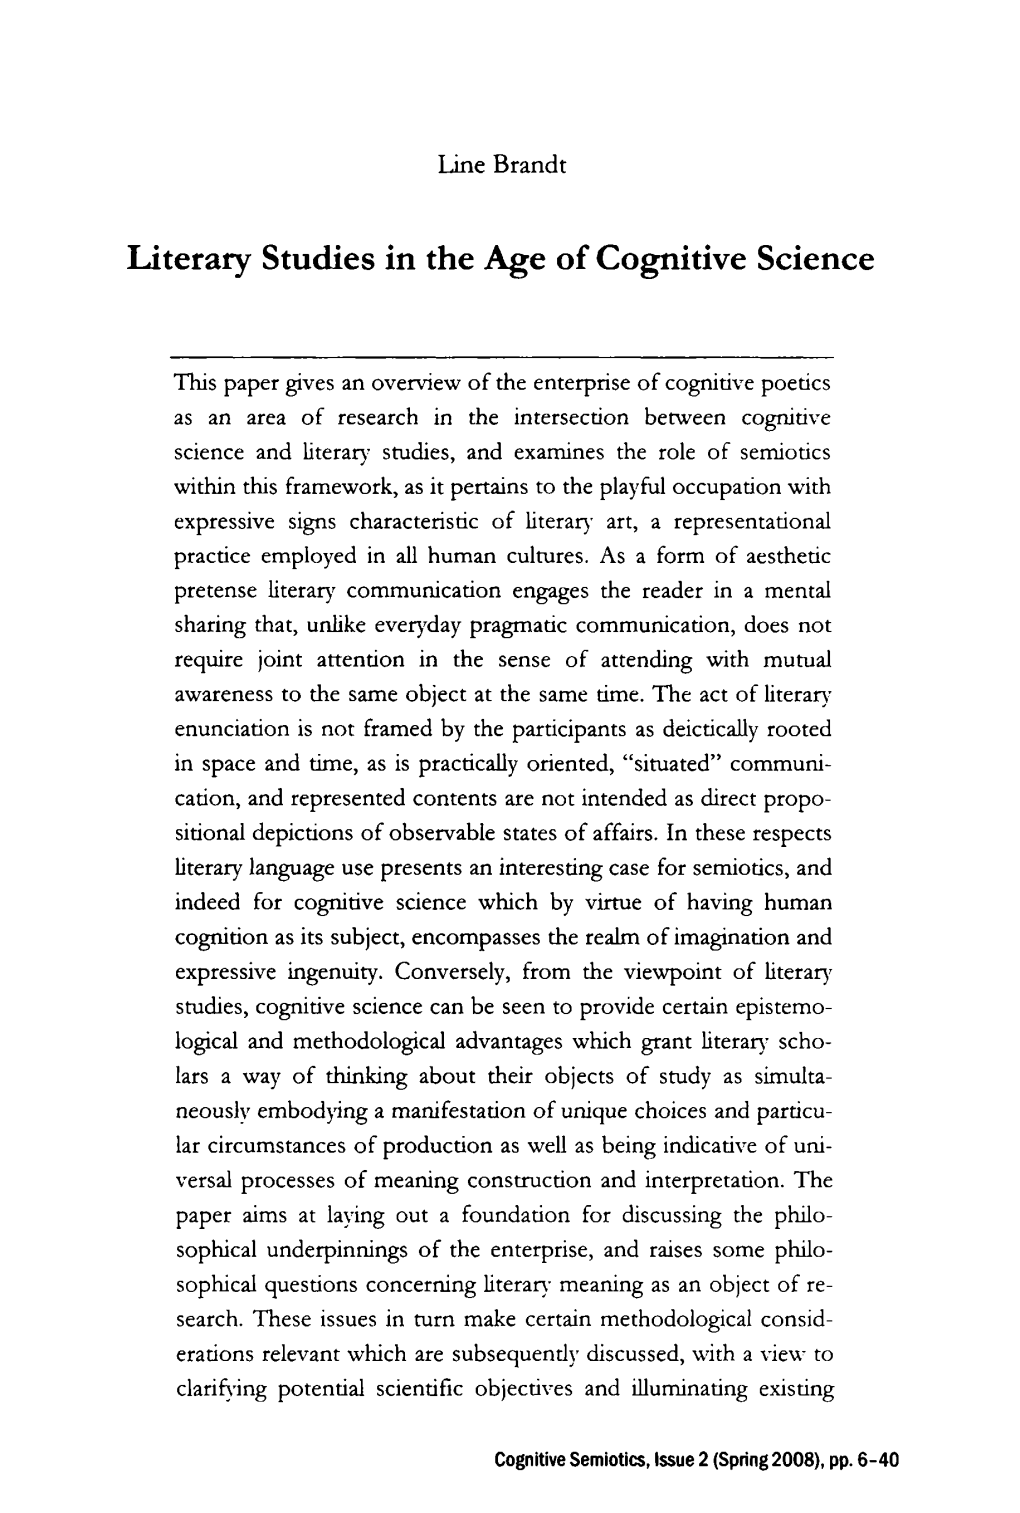 Literary Studies in the Age of Cognitive Science